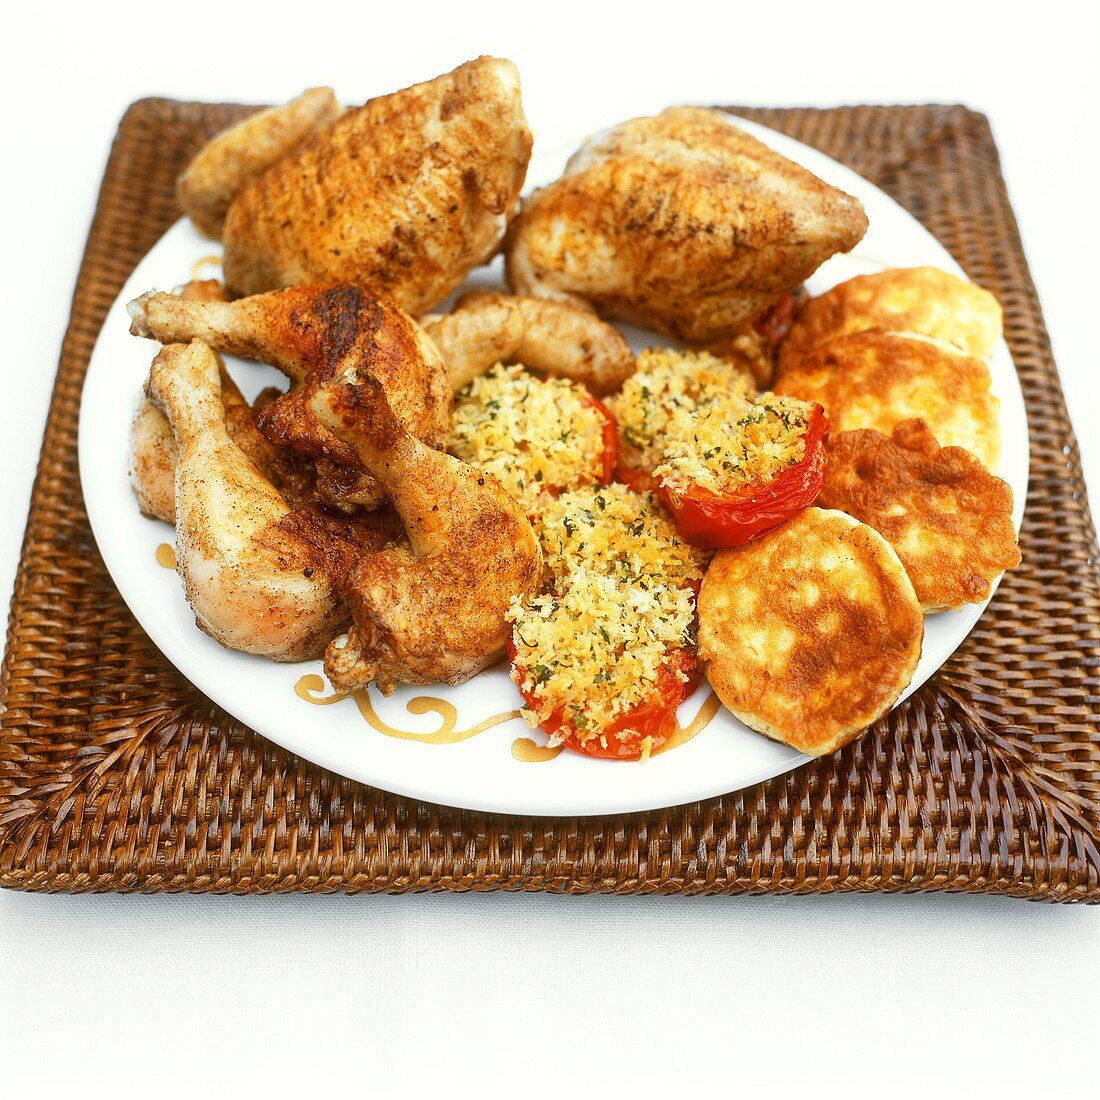 Cinnamon chicken with stuffed tomatoes and potato cakes